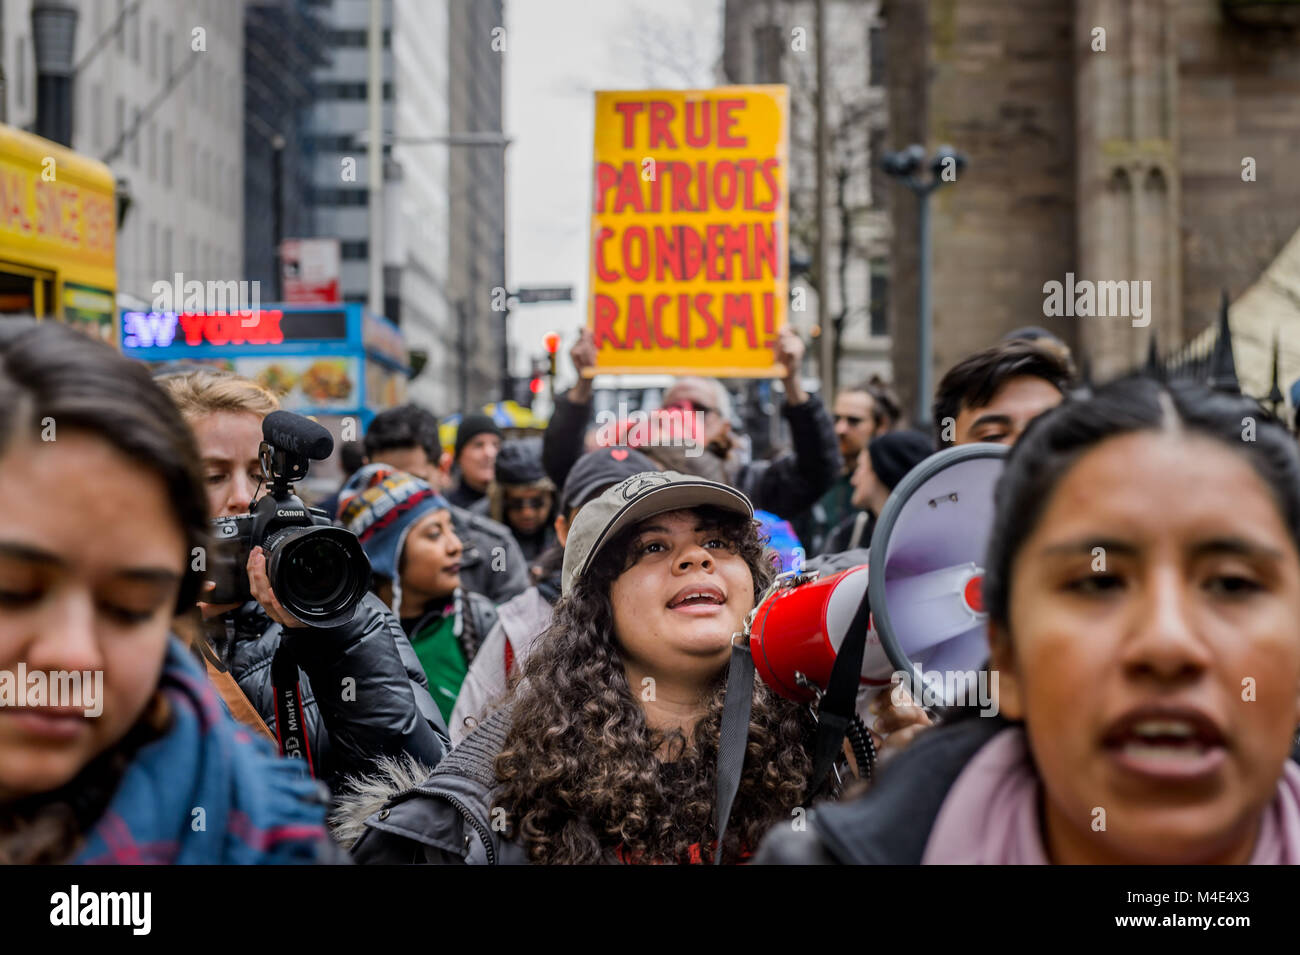 Haydi, 20, undocumented immigrated to the US fro La Ceiba, Honduras in 2012 - On February 15, 2018; 11 undocumented youth and allies began The Walk to Stay Home, a 15-day walk from New York City's Battery Park to Washington, DC's Martin Luther King Jr. memorial. The 250-mile journey has been organized by the Seed Project with the support of the #OurDream Campaign to draw attention to the need for a clean Dream Act that not only grants permanent protection for undocumented youth but does not harm 11 million undocumented people living and working in the United States. (Photo by Erik McGregor / Stock Photo